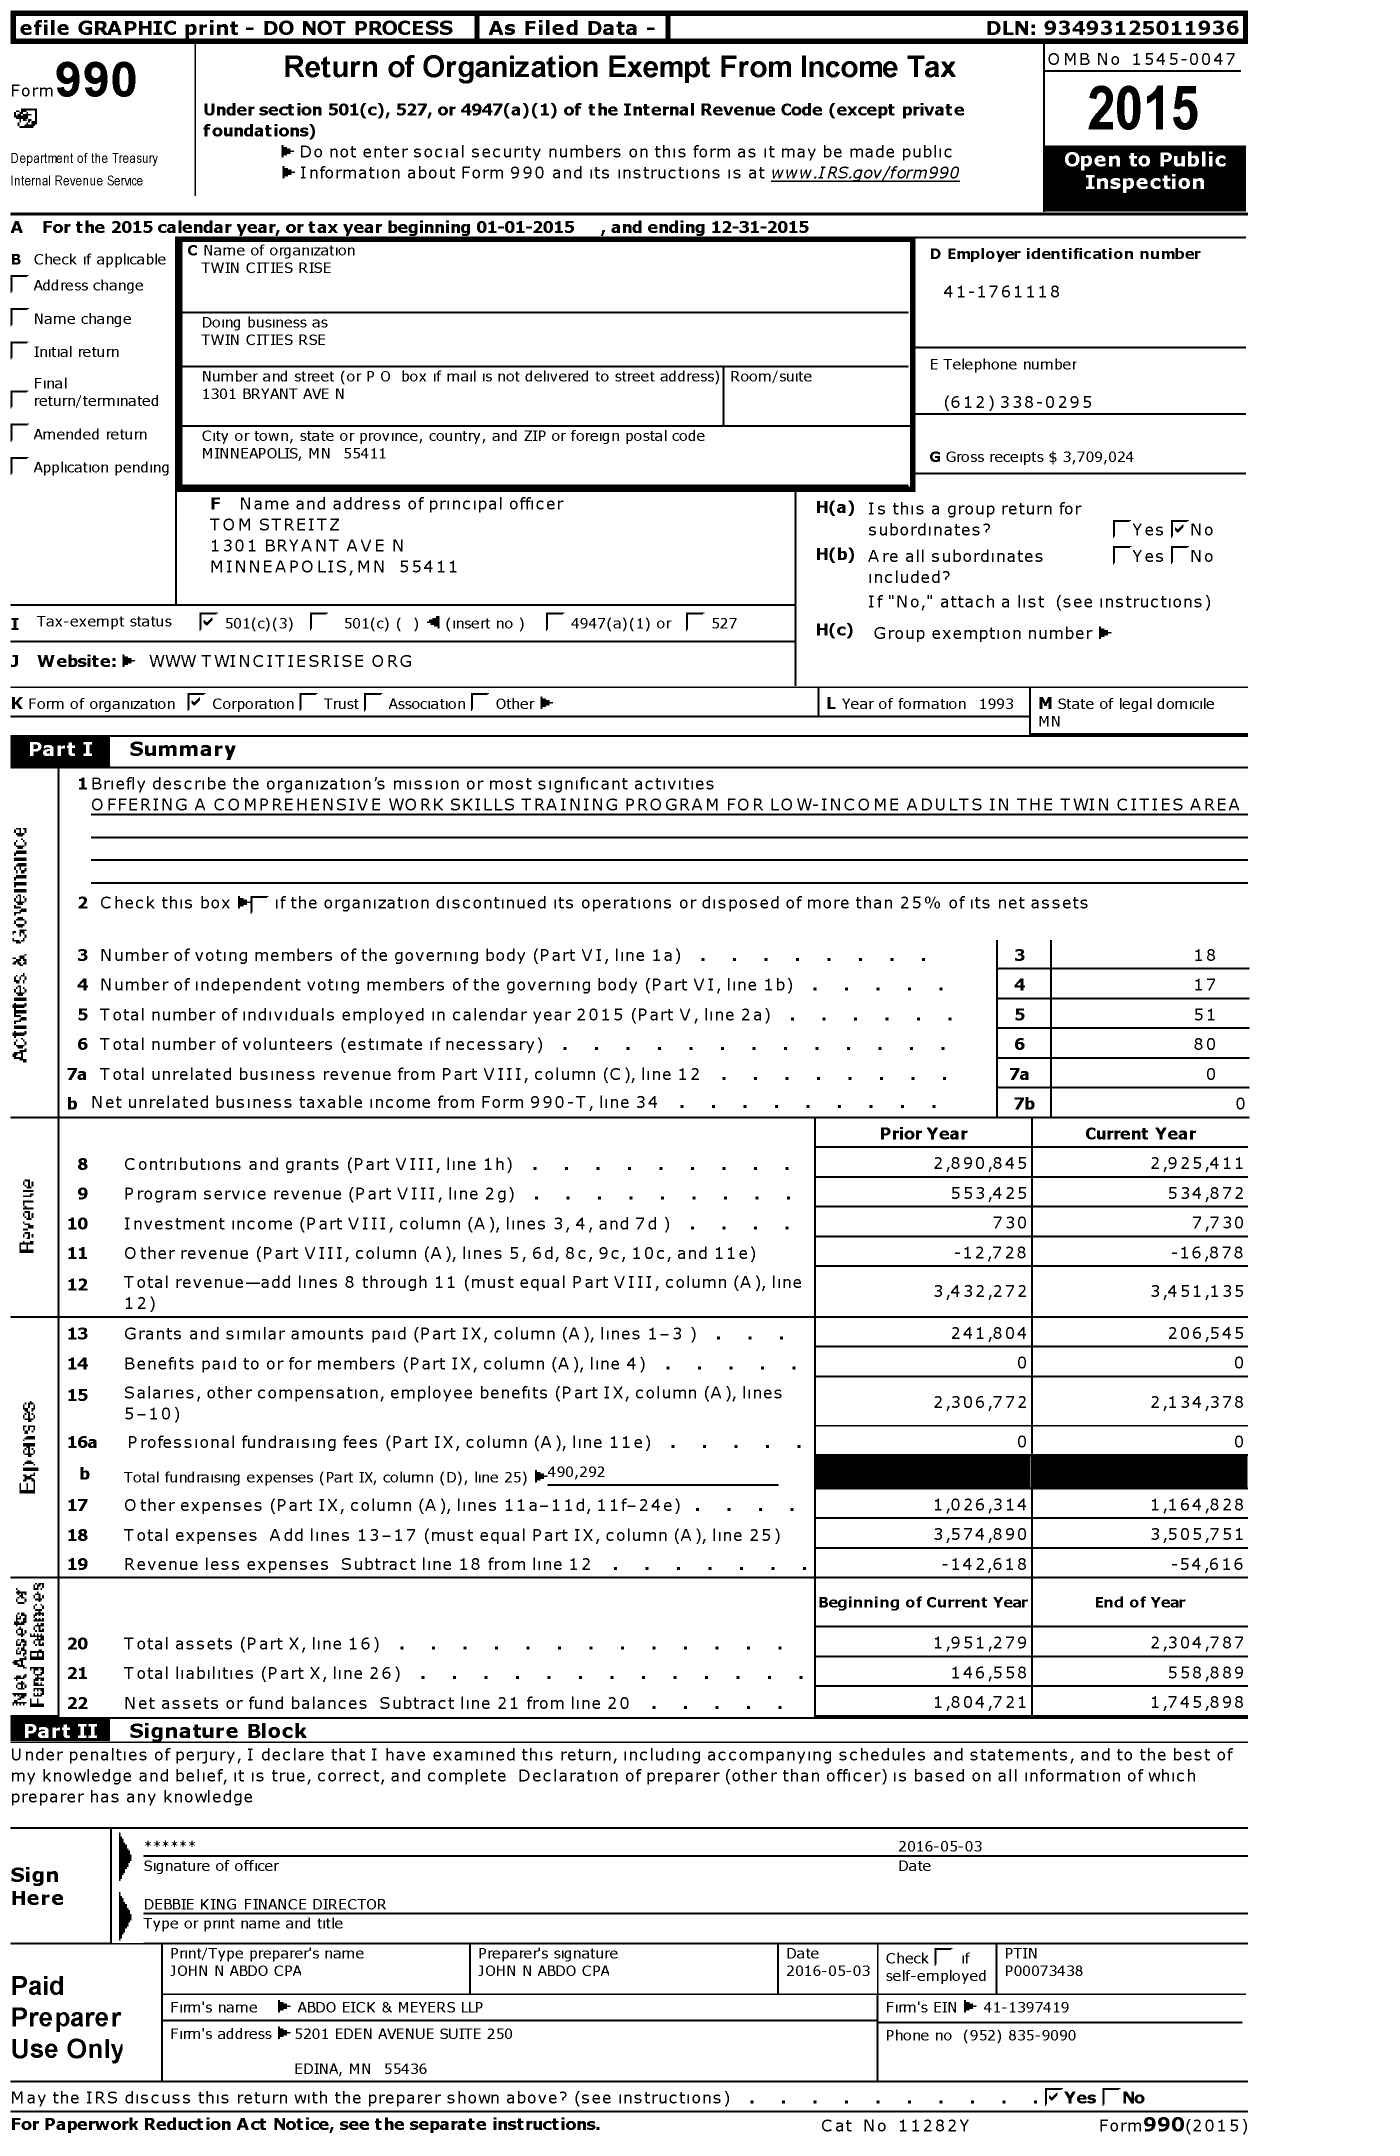 Image of first page of 2015 Form 990 for Twin Cities Rise (TCR)